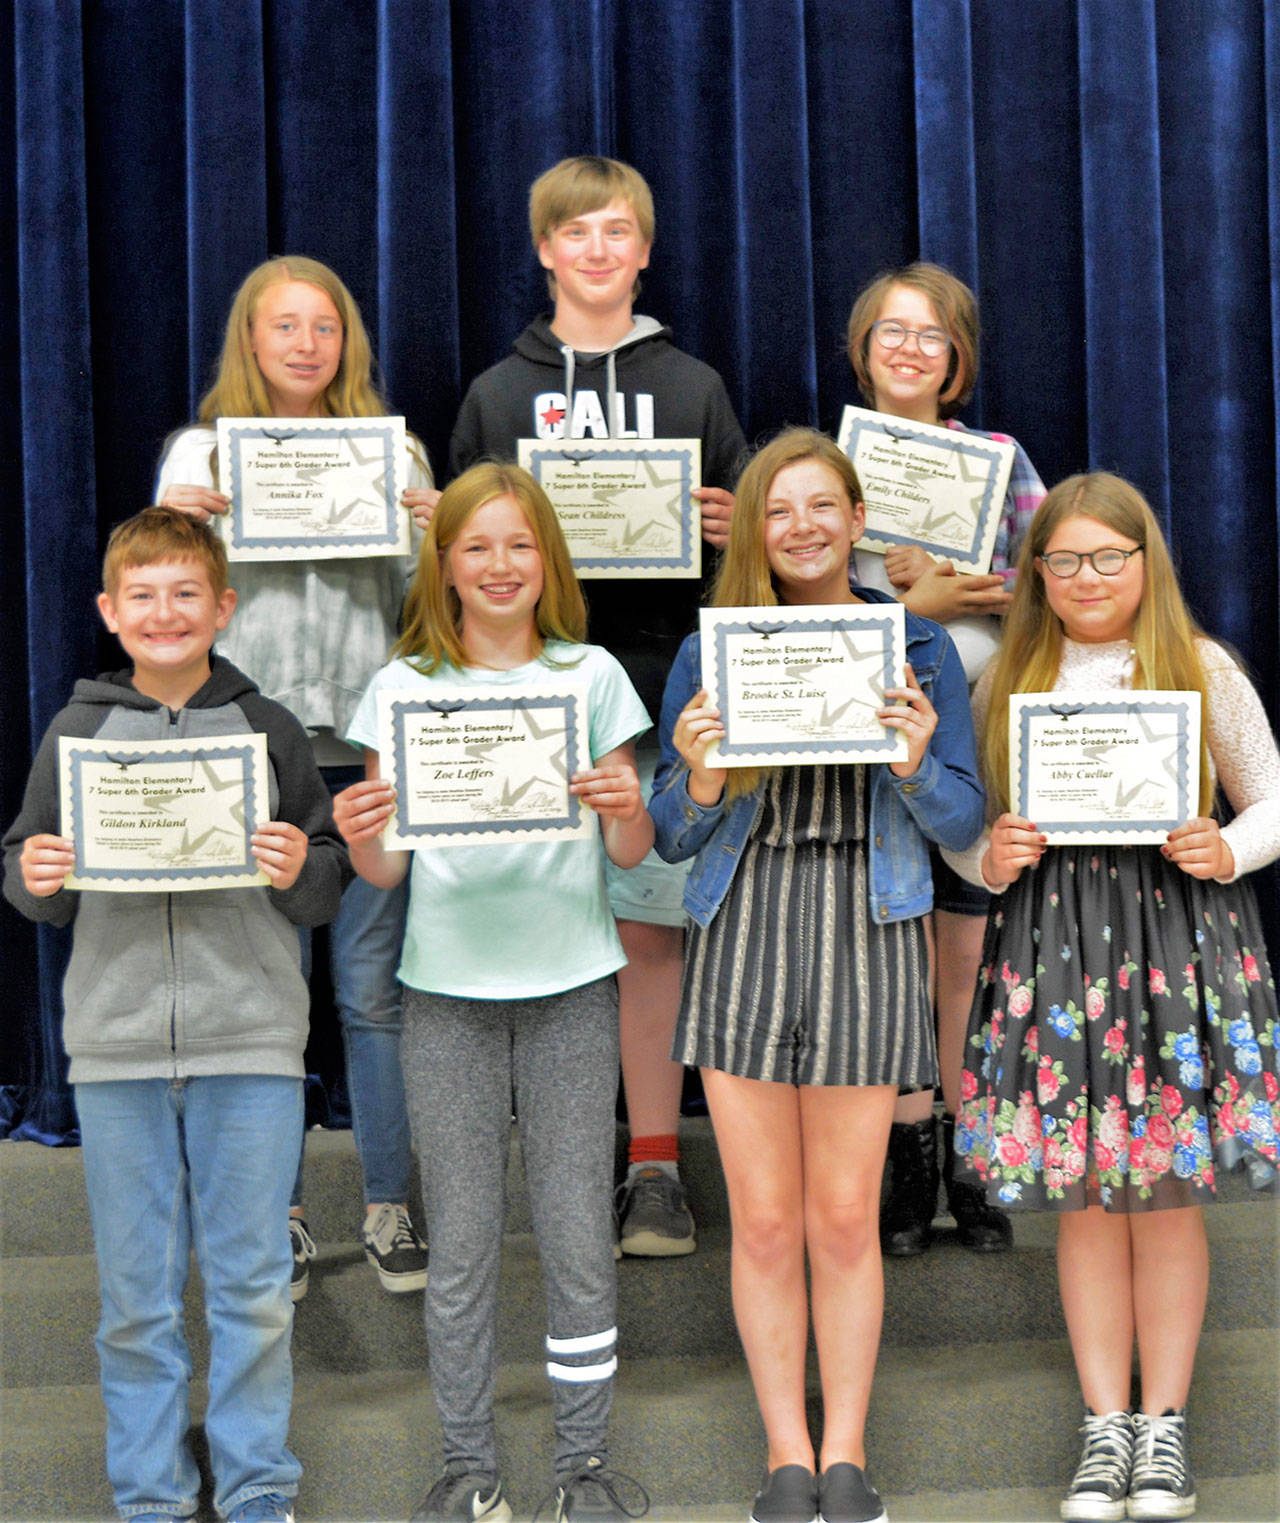 The Seven Super Sixth Graders are, front row, from left, Gildon Kirkland, Zoe Leffers, Brooke St. Luise and Abbigail Cuellar; and back row, from left, Annika Fox, Sean Childress and Emily Childers. (Gary Pringle/Port Angeles School District)